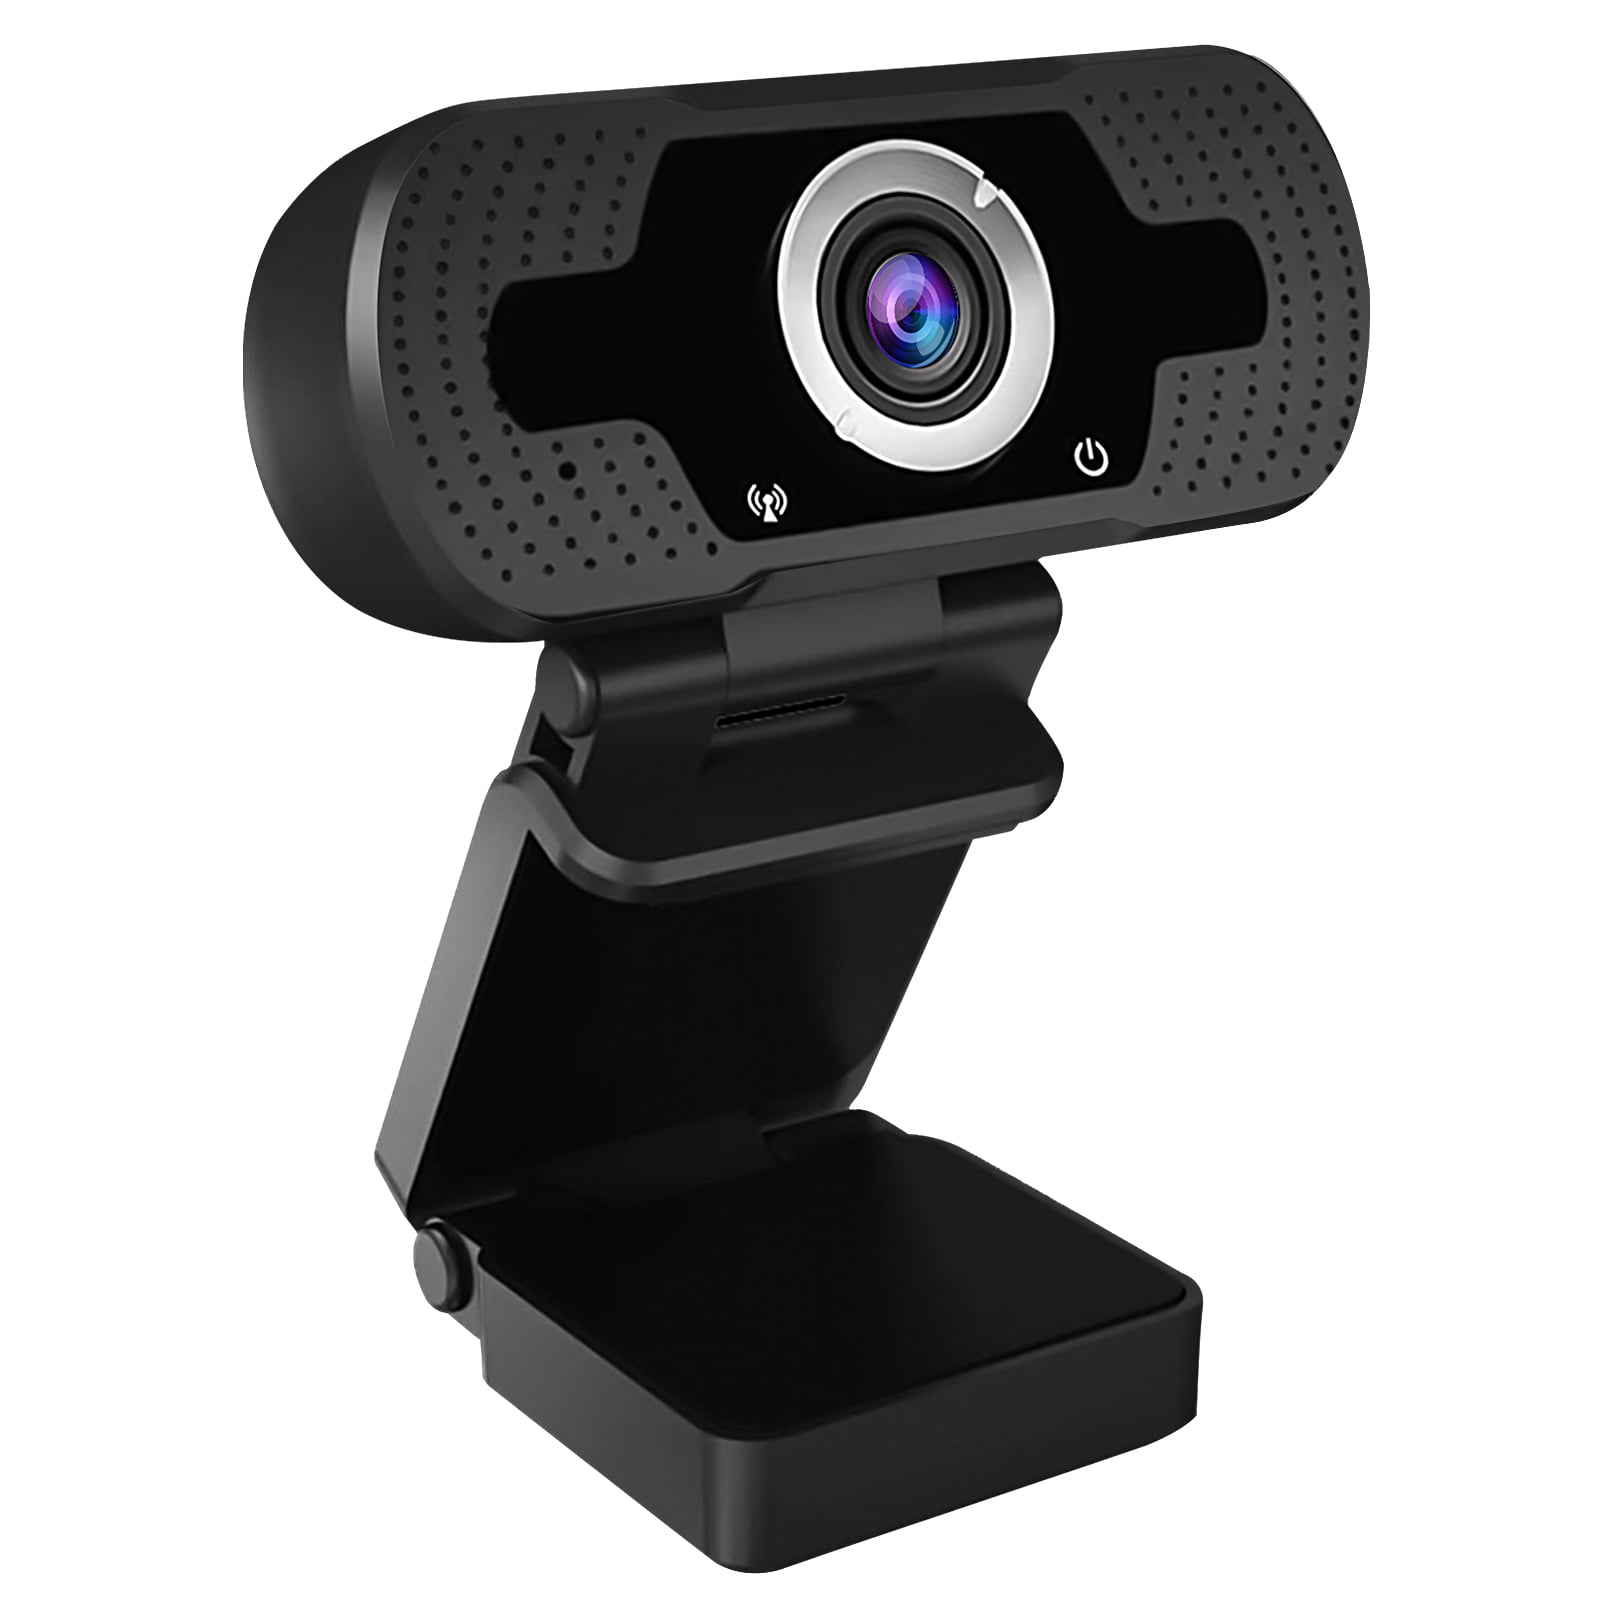 Aode Webcam 1080P Full HD Stereo Microphone USB Computer Web Camera Video Chat for Recording Streaming Gaming Conferencing Mac Windows PC Laptop Desktop Xbox Skype OBS Twitch YouTube Xsplit